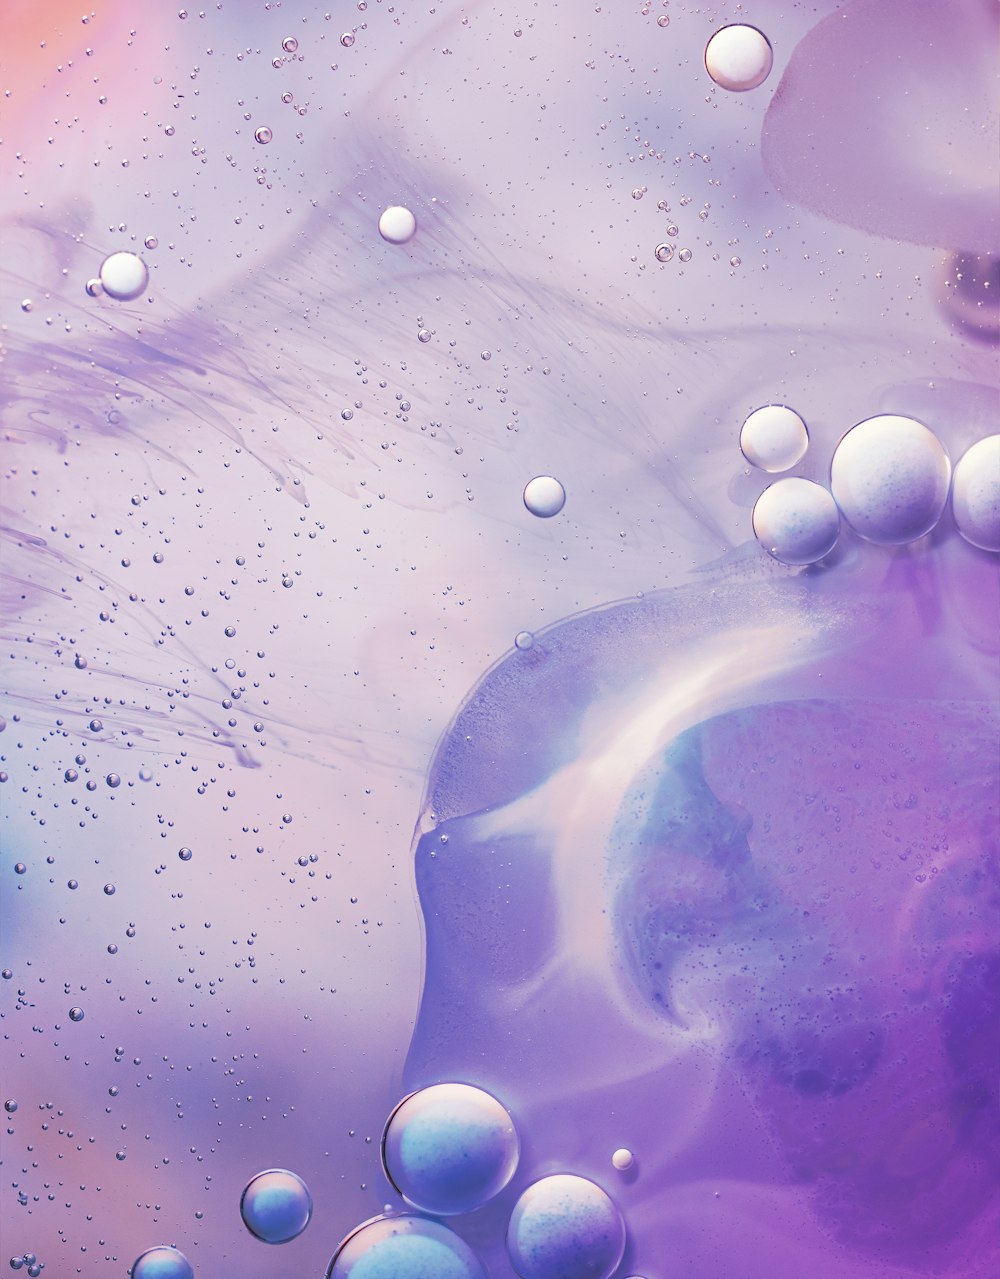 a close up of a purple liquid with bubbles